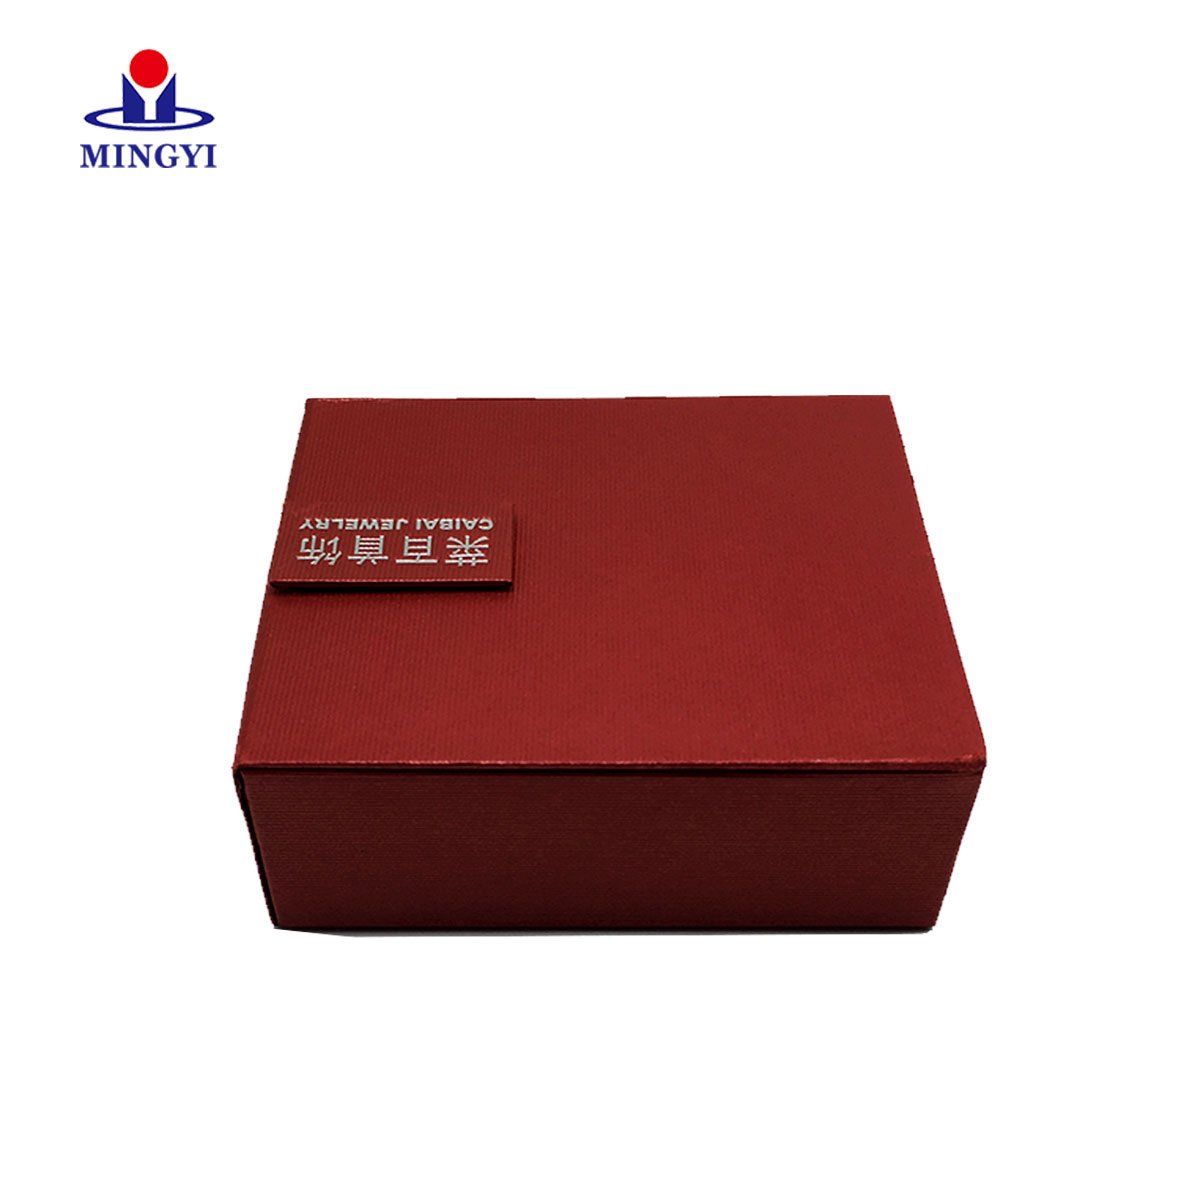 Our Jewelry gift box is always favored by customers. mingyiprinting.net/new-design-cla… #JewelryGiftBox #Jewelrygiftbox